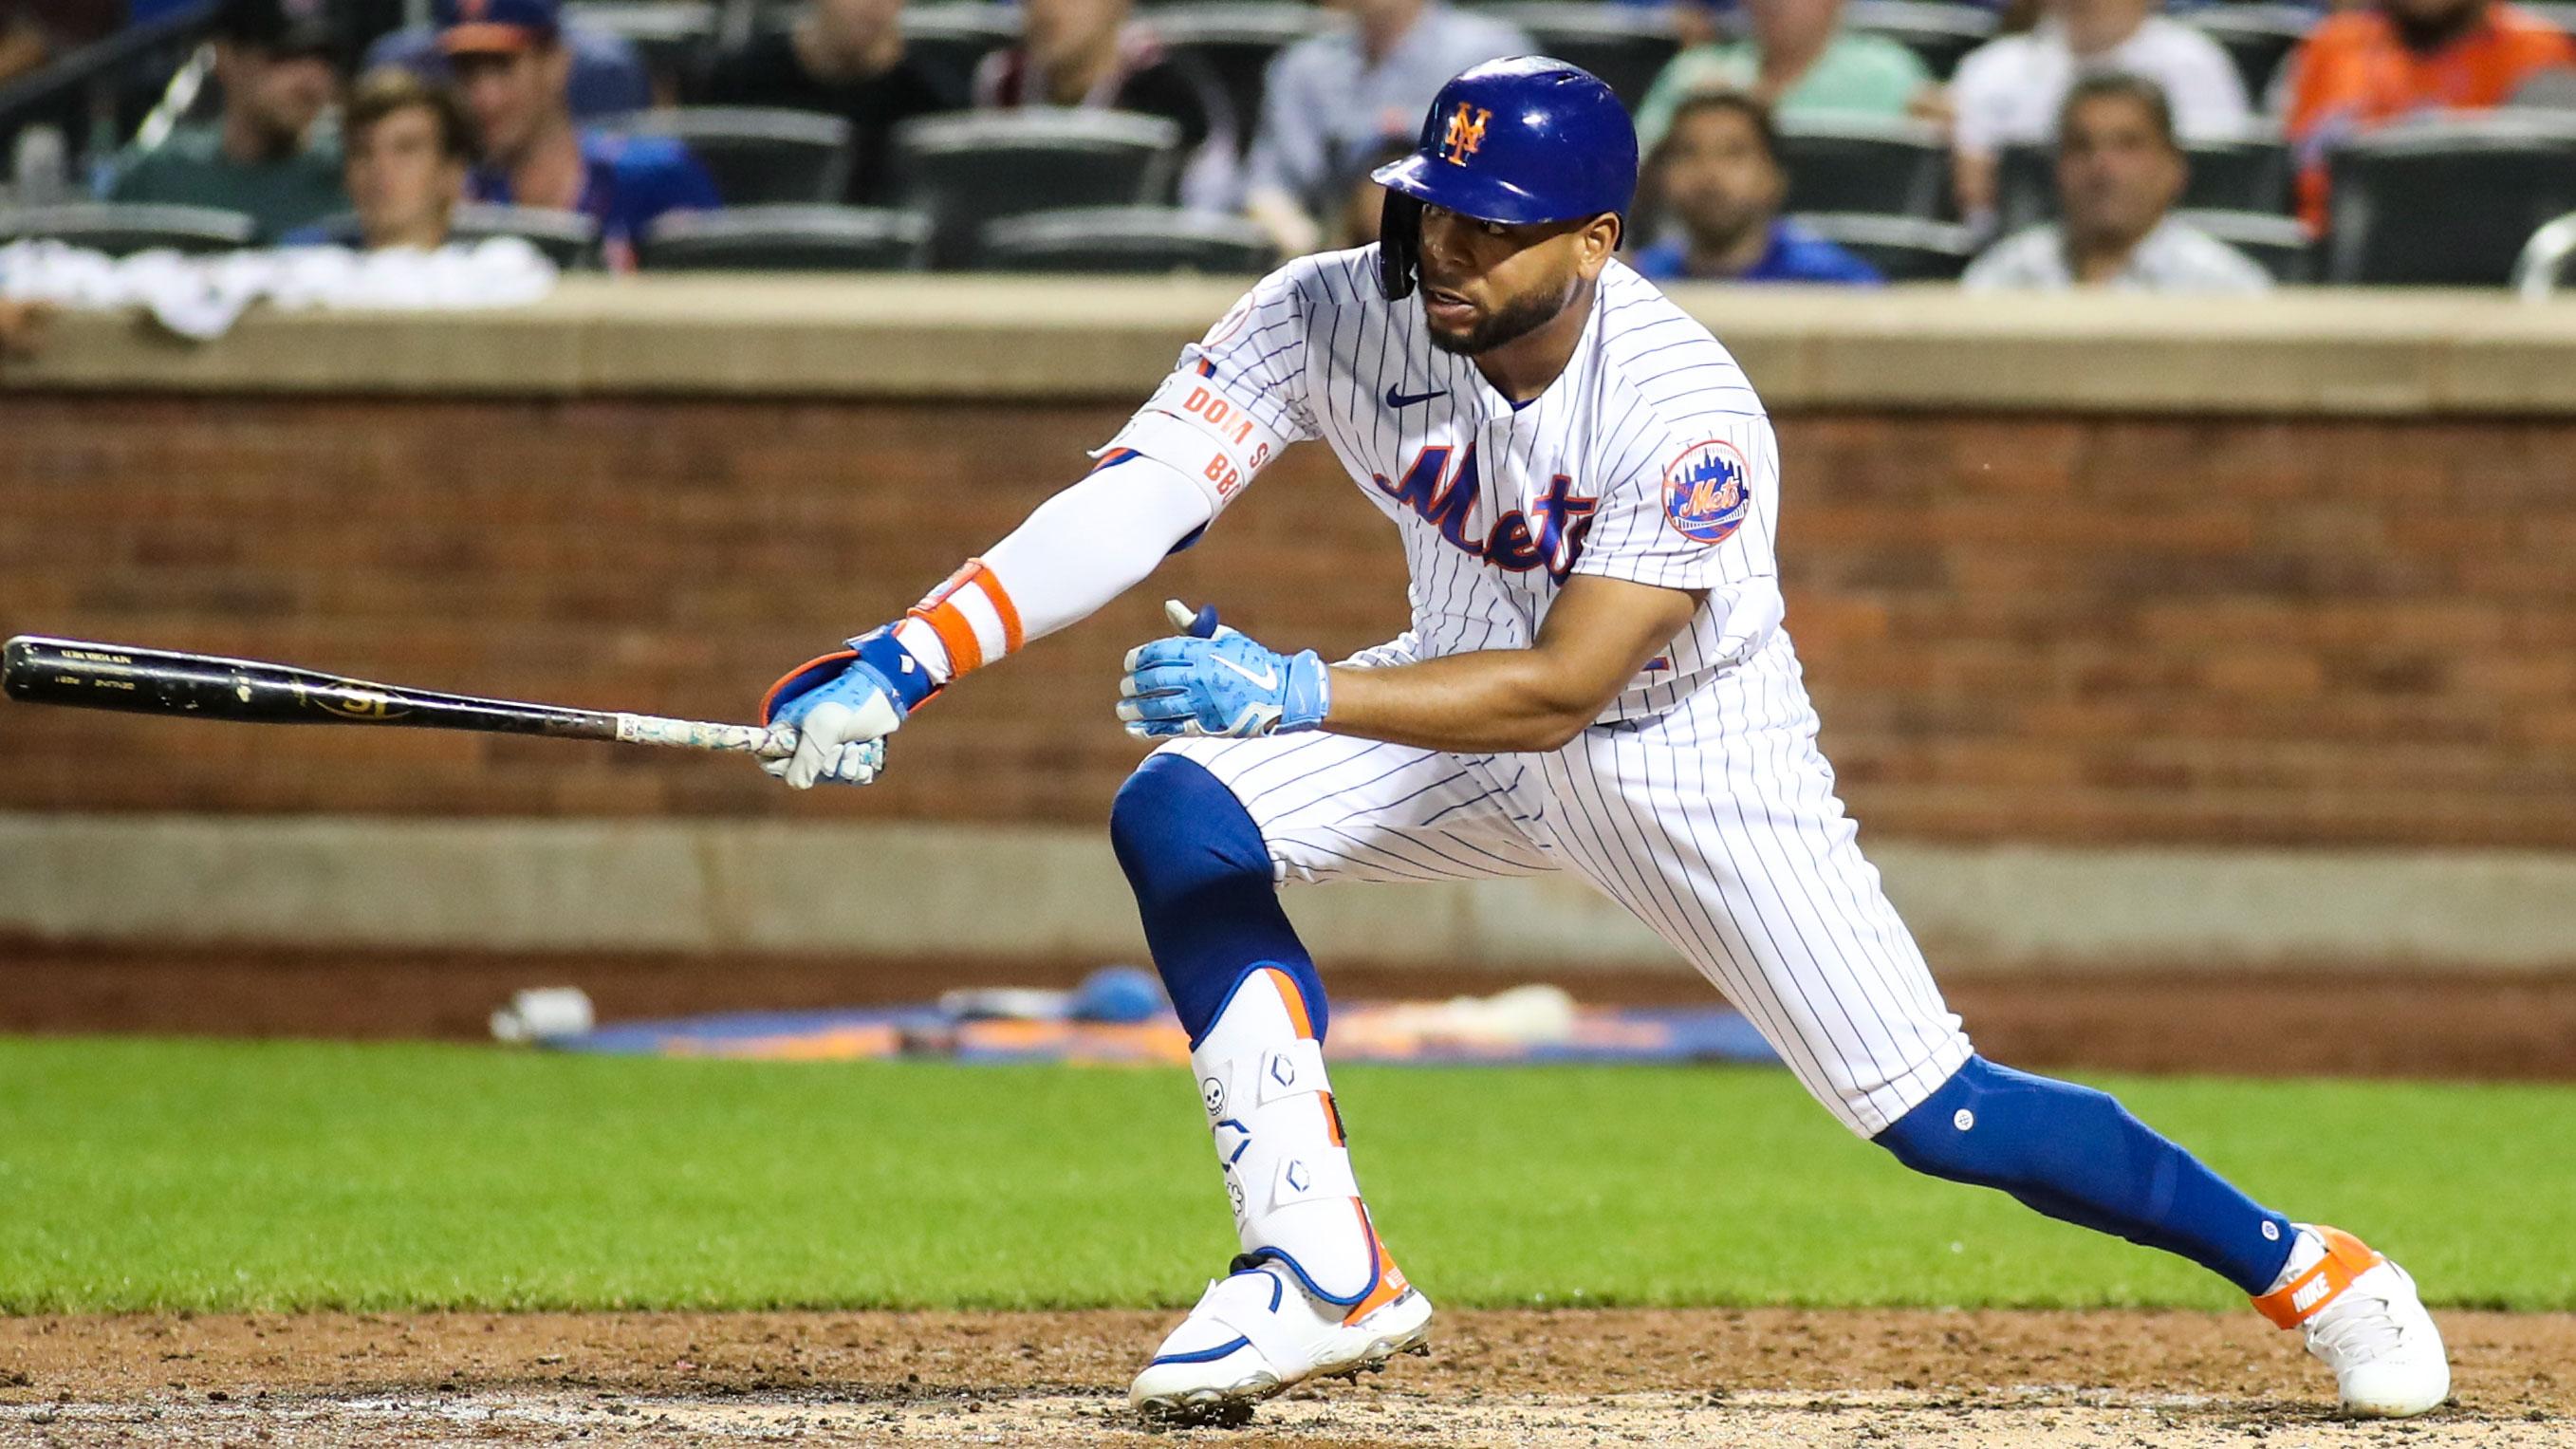 Jun 25, 2021; New York City, New York, USA; New York Mets left fielder Dominic Smith (2) hits a single in the fourth inning against the Philadelphia Phillies at Citi Field. / Wendell Cruz-USA TODAY Sports